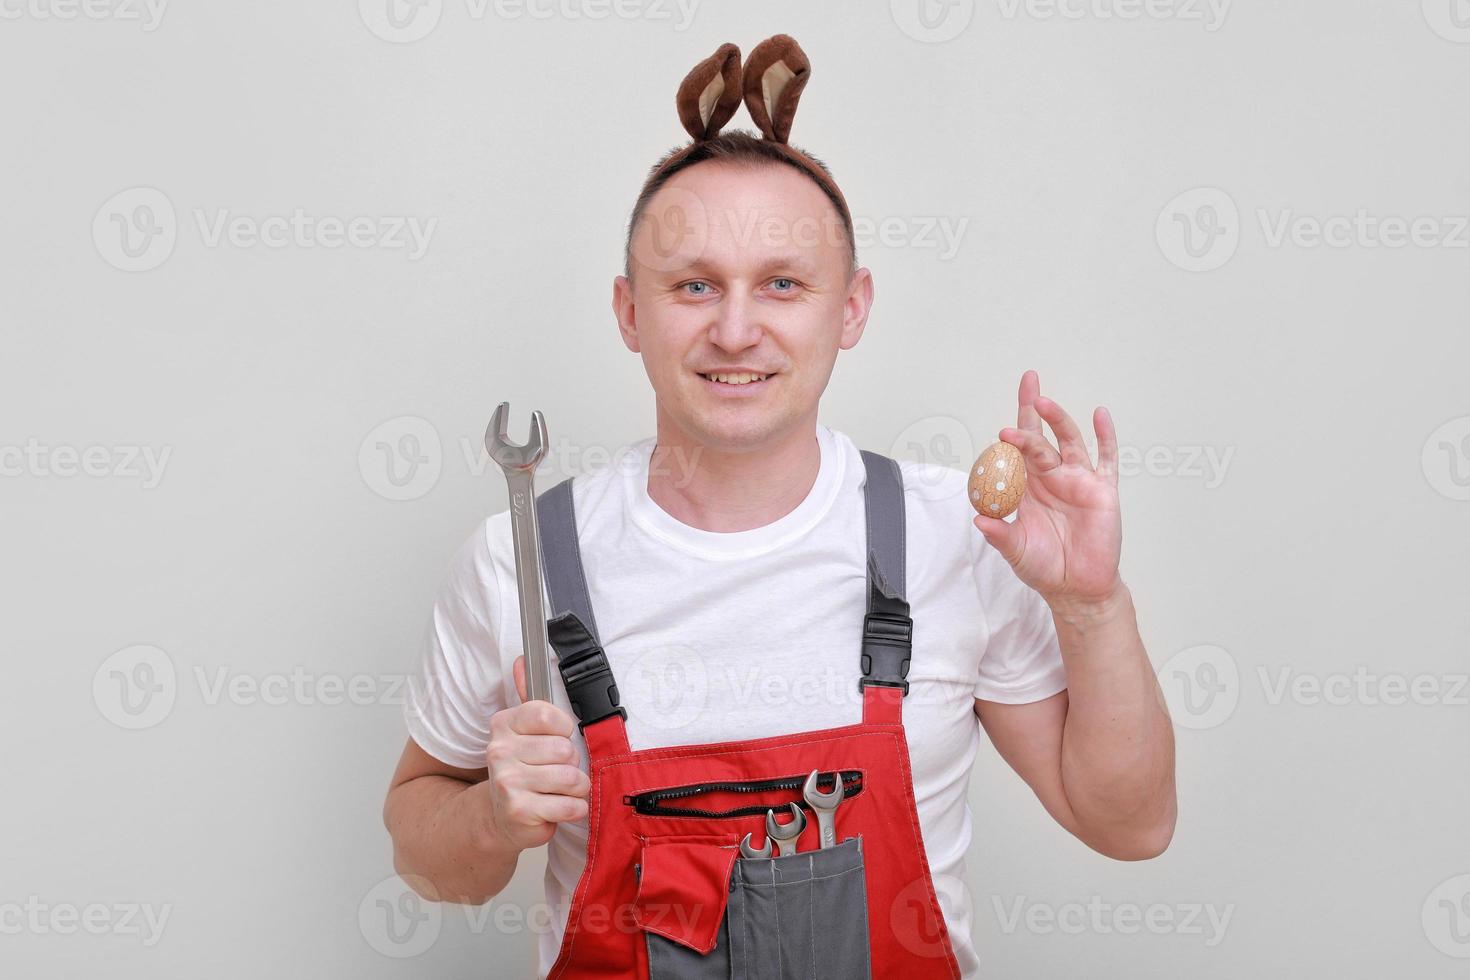 Easter holiday, celebration concept. funny smiling engineer worker or mechanic is wearing rabbit ears on head, holding wrenches and painted egg white background. celebrating orthodox day photo